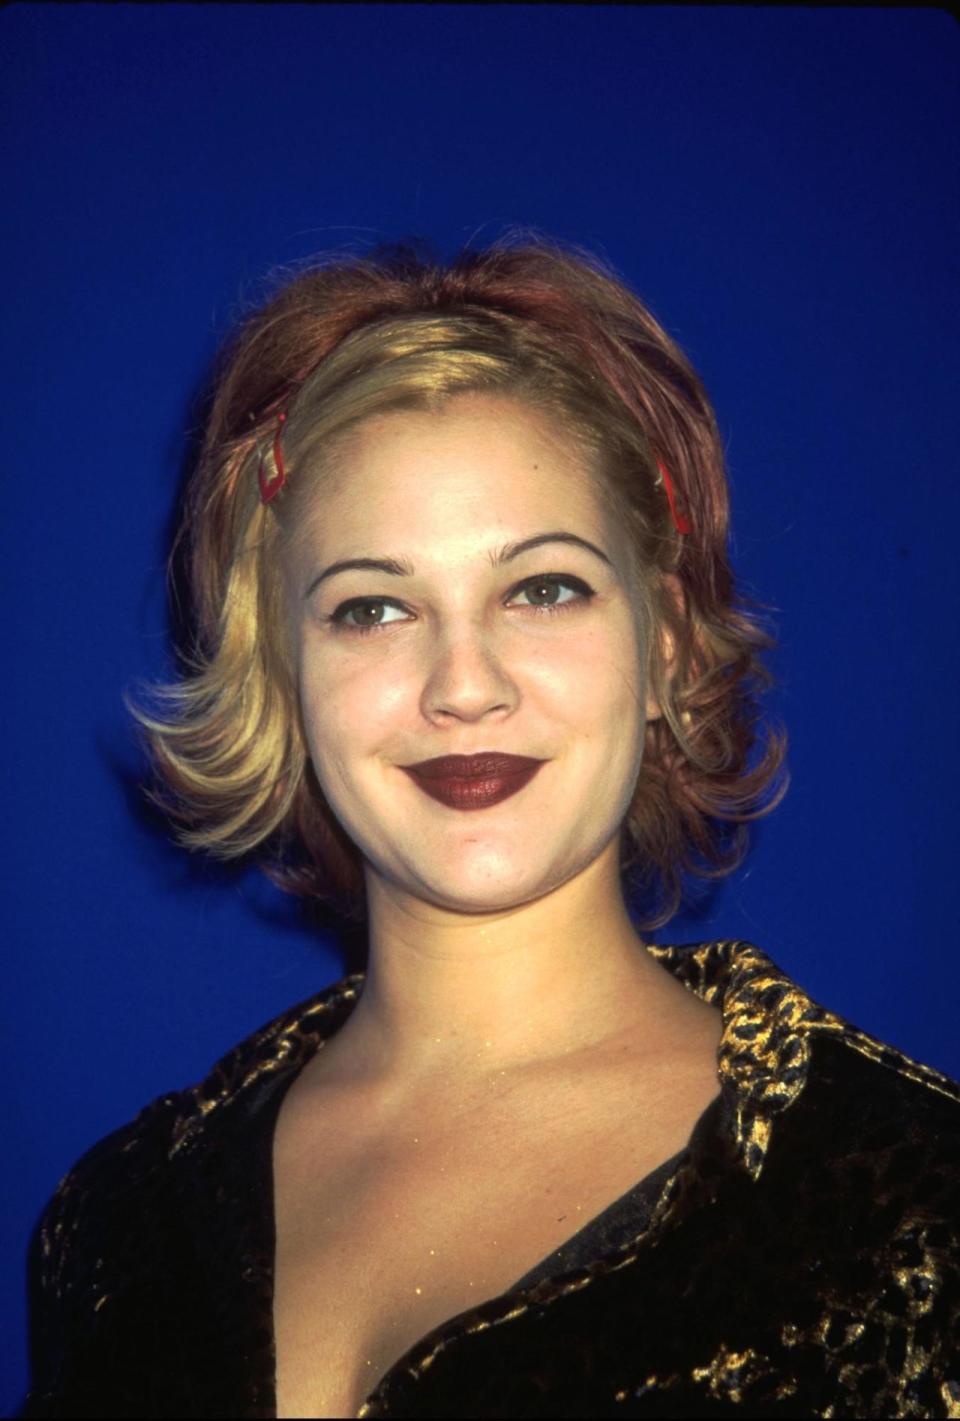 Brow No. 6: Drew Barrymore's '90s Thin Line